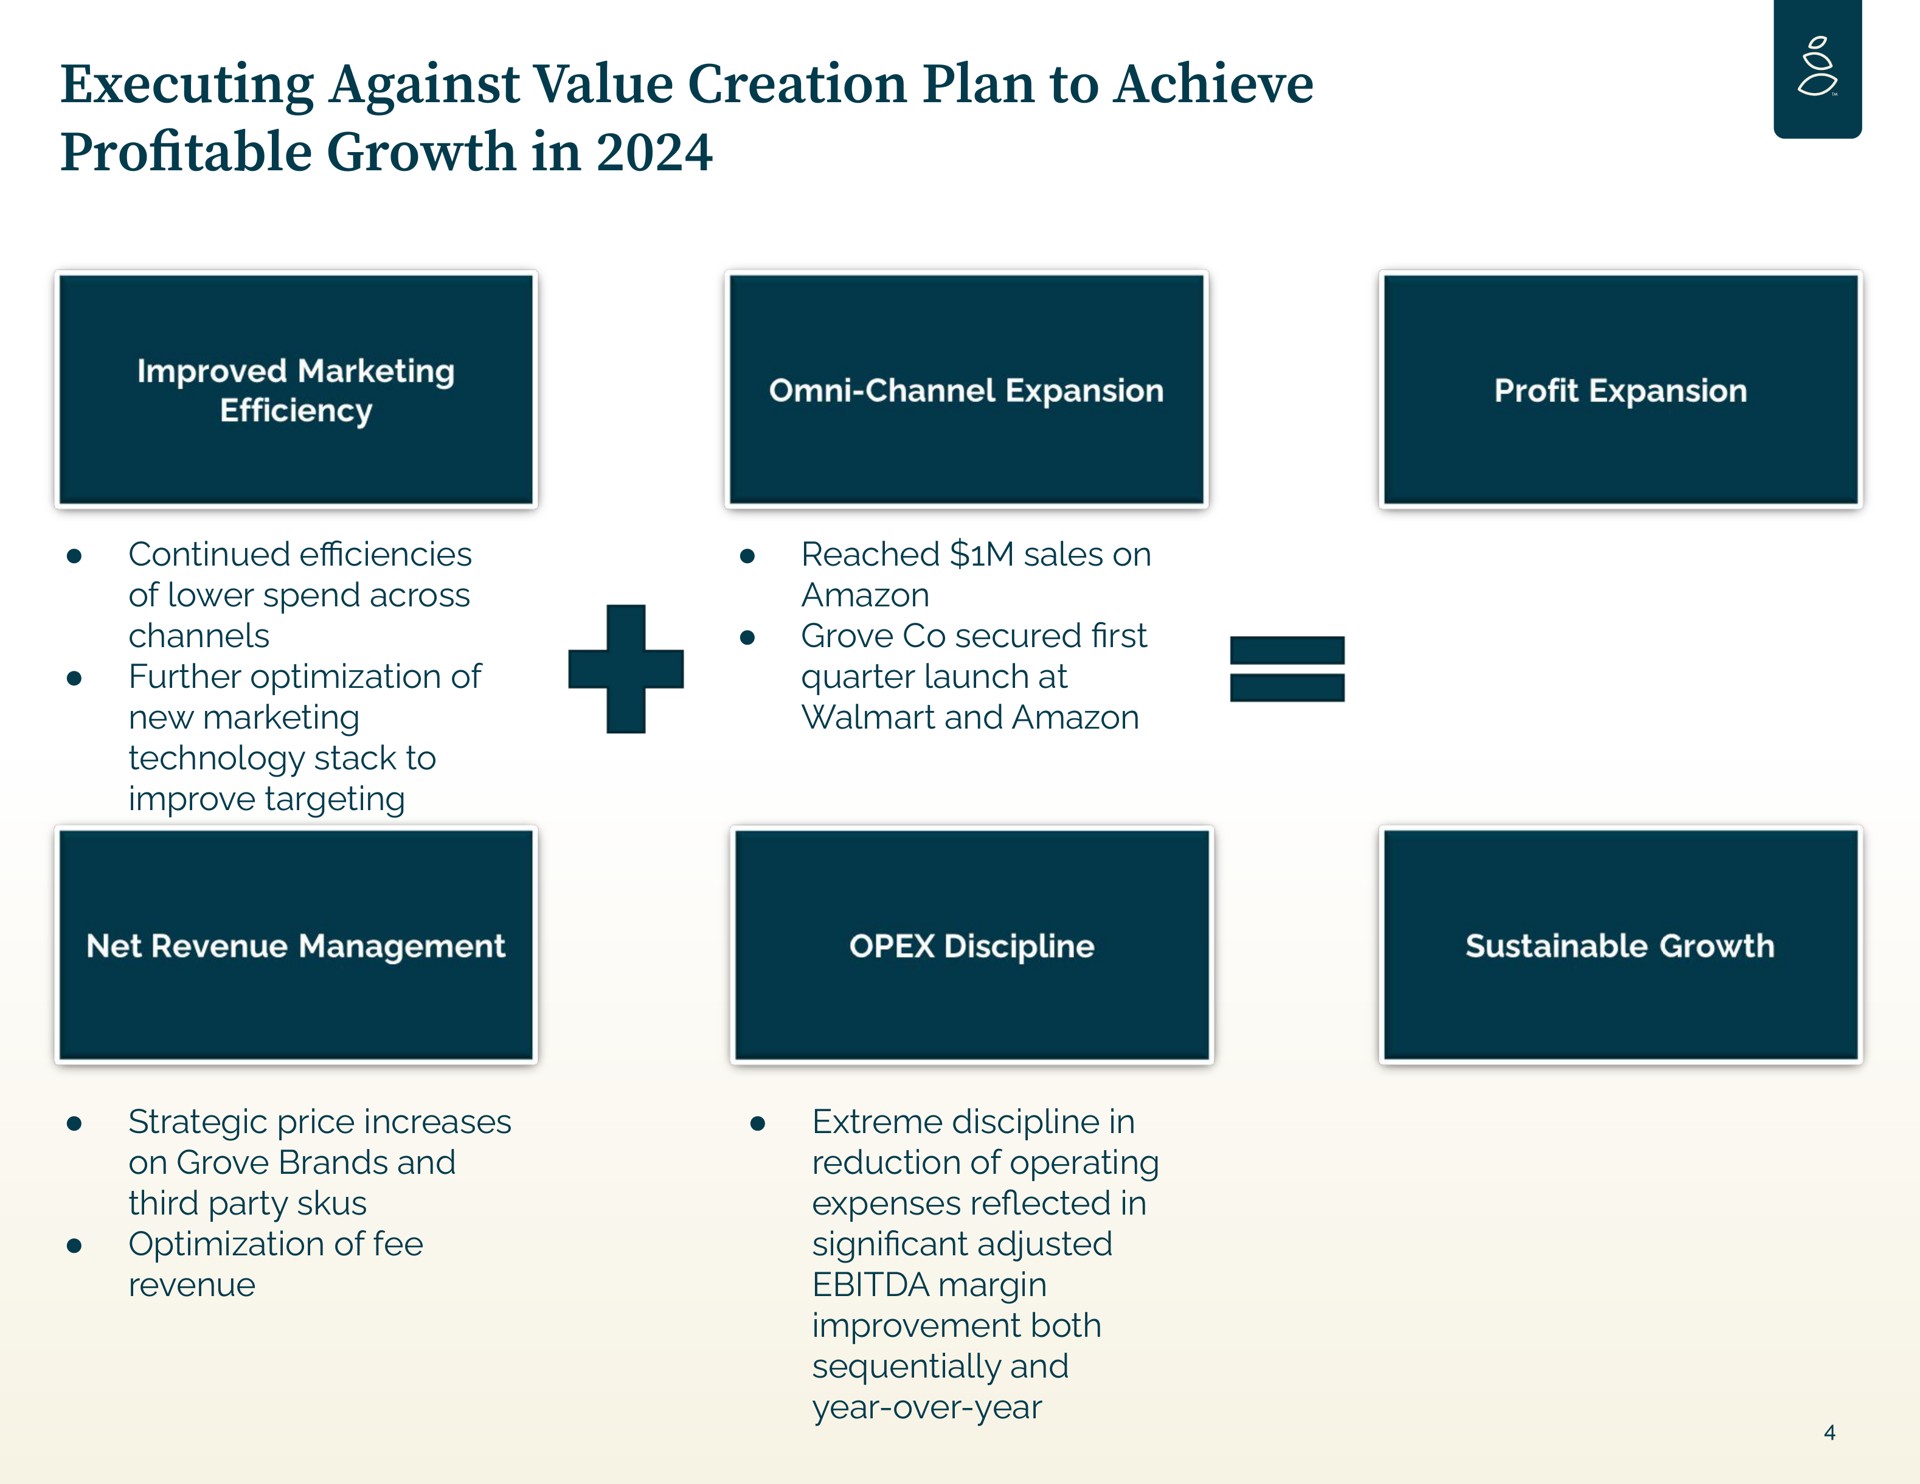 executing against value creation plan to achieve pro table growth in continued of lower spend across channels further optimization of new marketing technology stack to improve targeting reached sales on grove secured quarter launch at and strategic price increases on grove brands and third party optimization of fee revenue extreme discipline in reduction of operating expenses in cant adjusted margin improvement both sequentially and year over year profitable | Grove